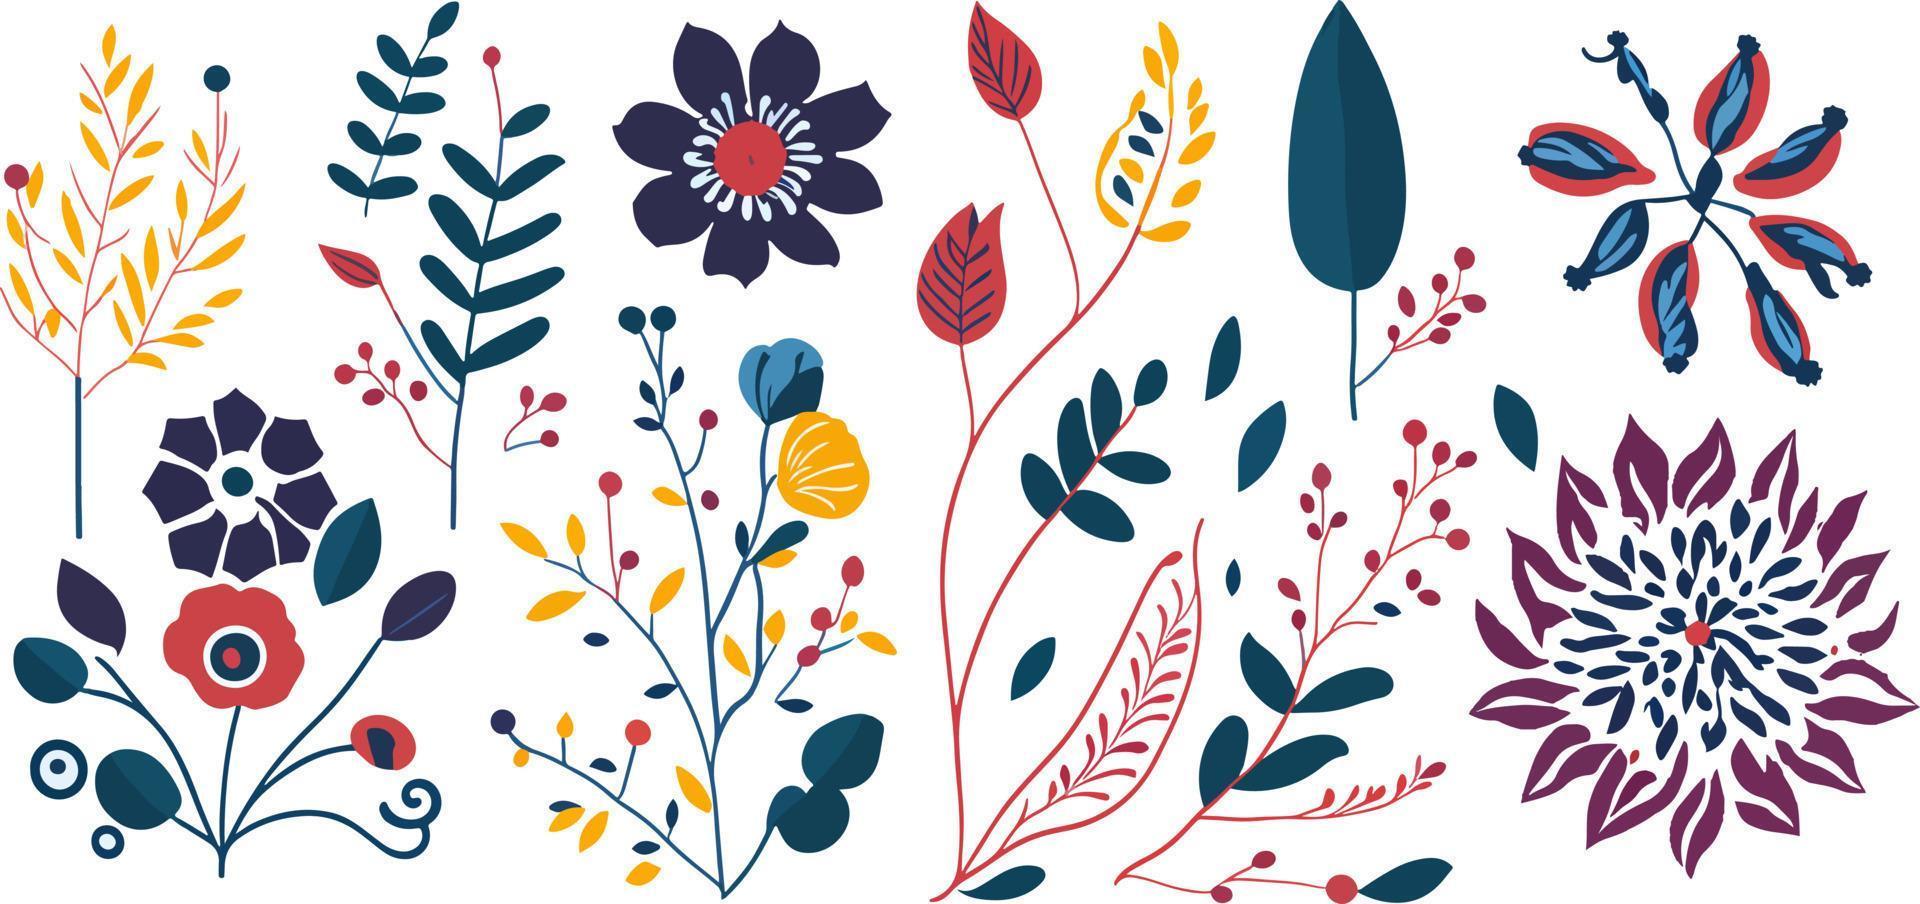 Transform Your Designs with a Stunning Collection of Flat Color Floral Elements vector